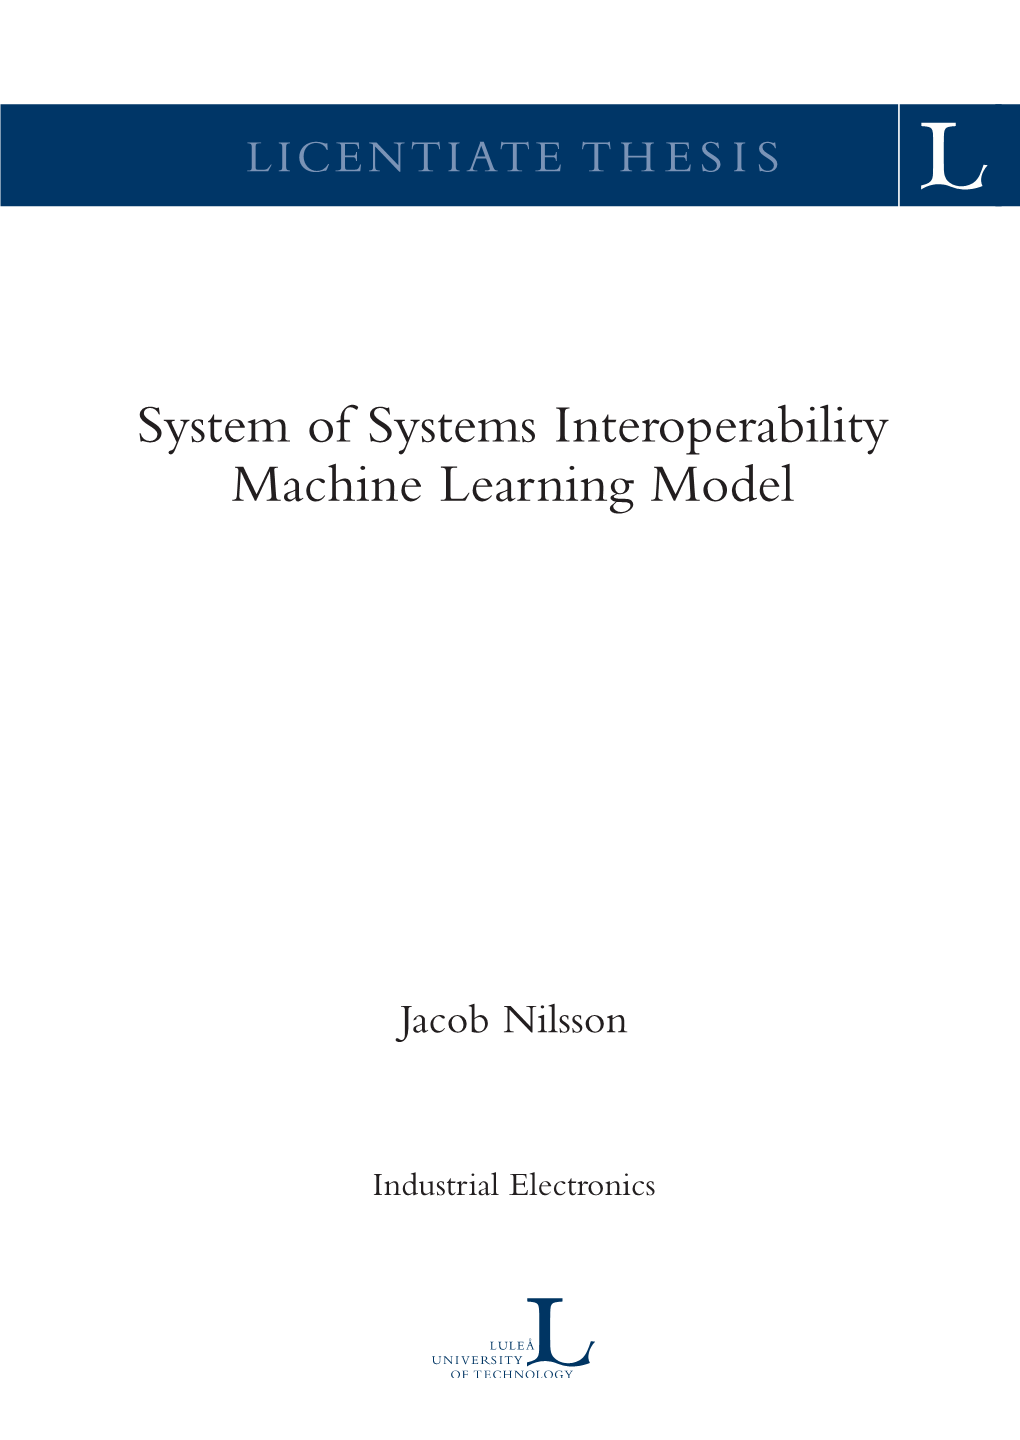 System of Systems Interoperability Machine Learning Model